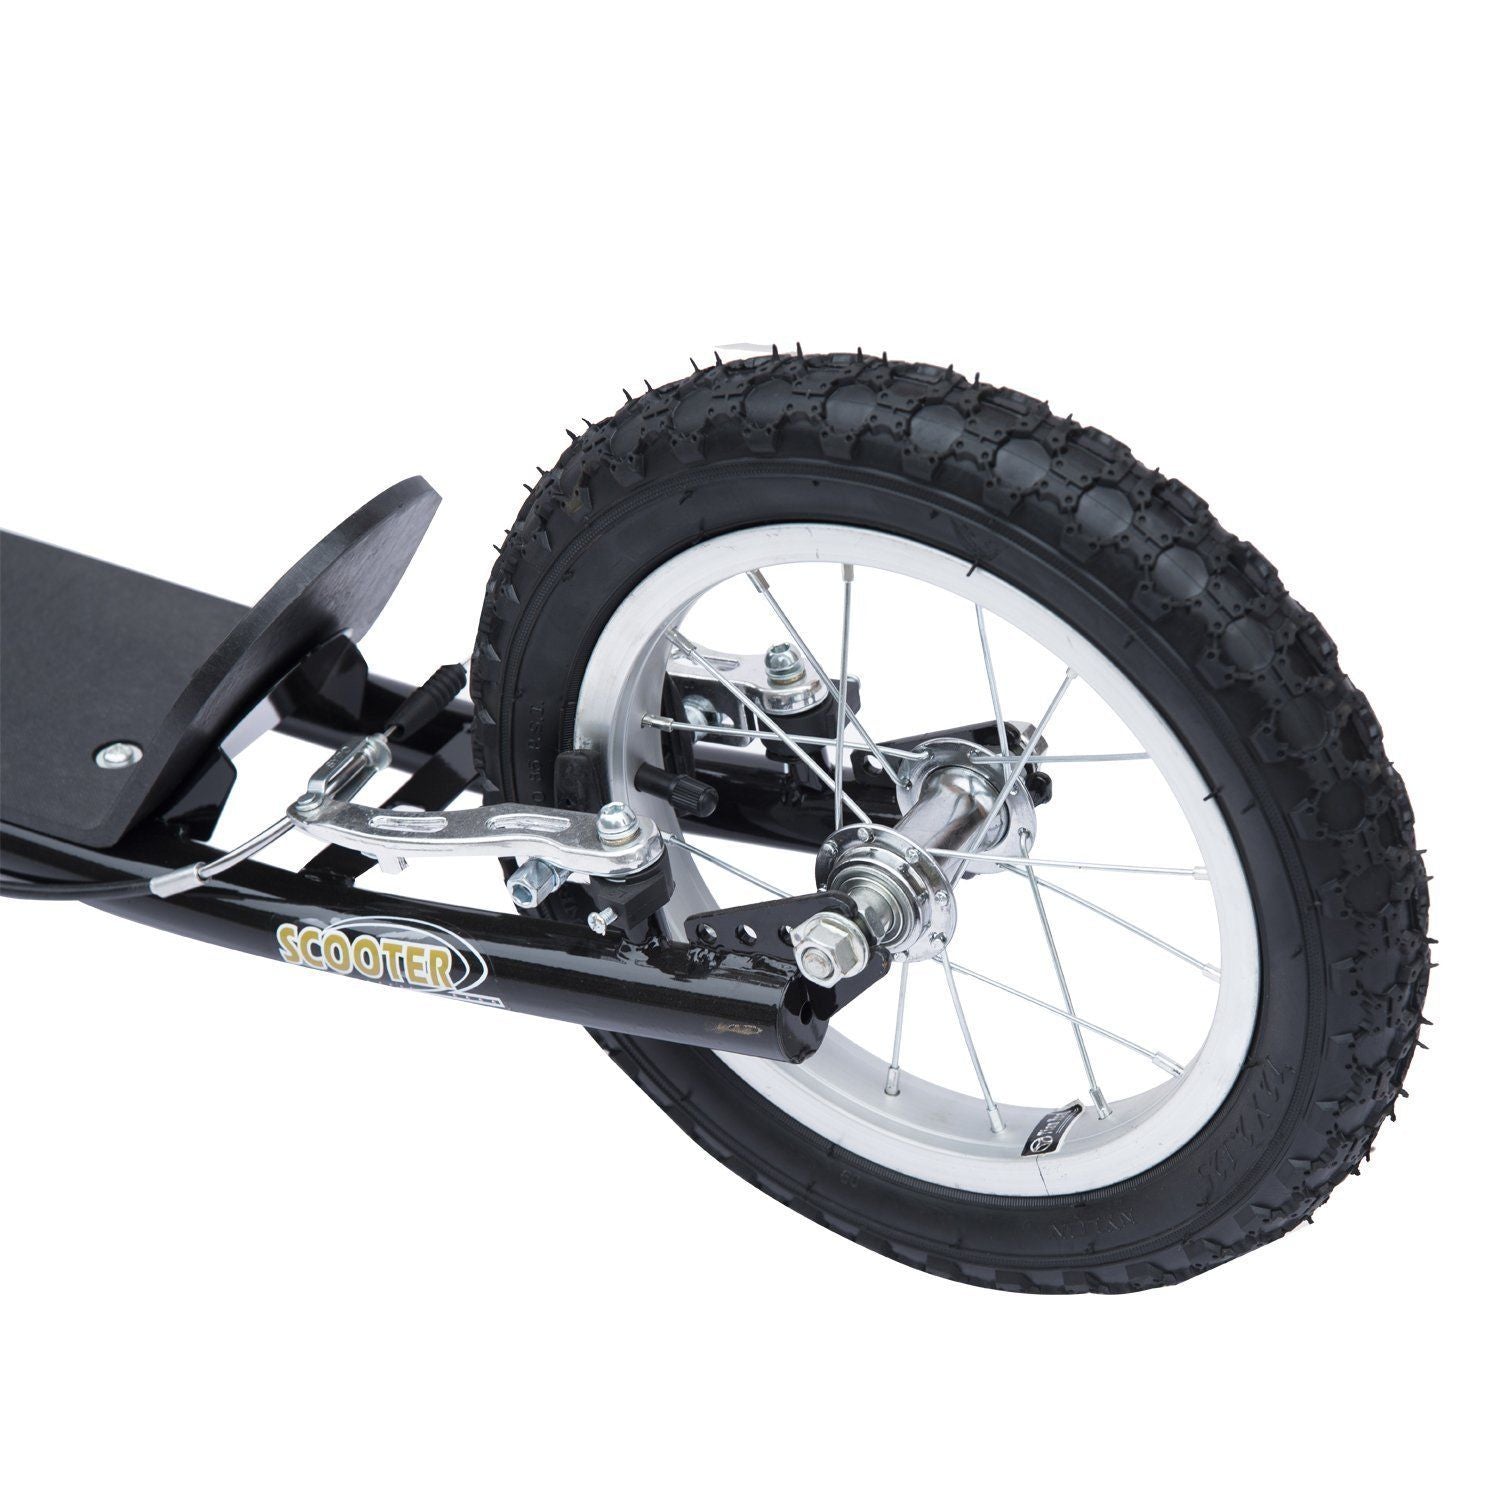 Adjustable Teen Kick Scooter Child Pro Stunt Scooter Ride On Speeder Kids Street Bike 16" Inflatable Tire Black at Gallery Canada